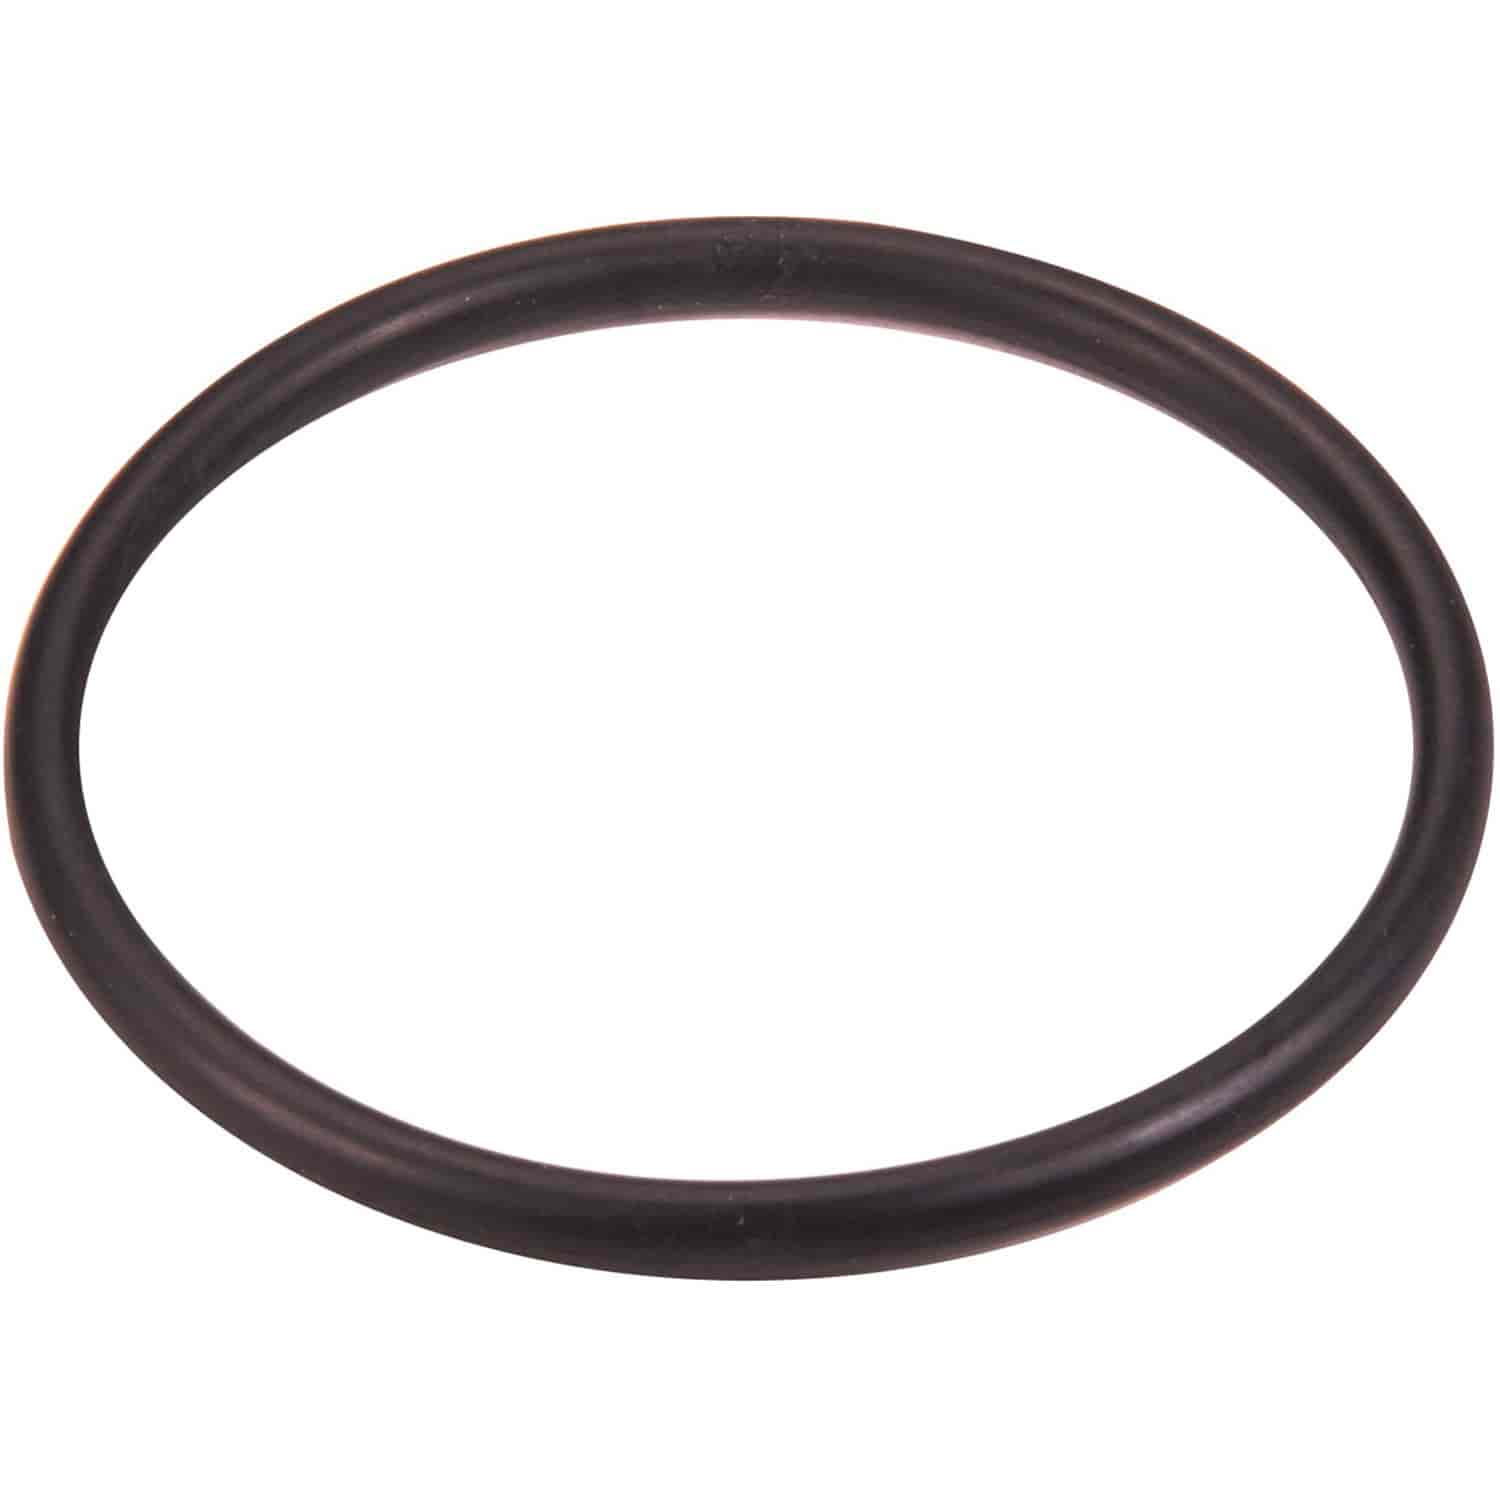 Thermostat Seal O-Ring Gasket 1991-2015 Various Ford Models